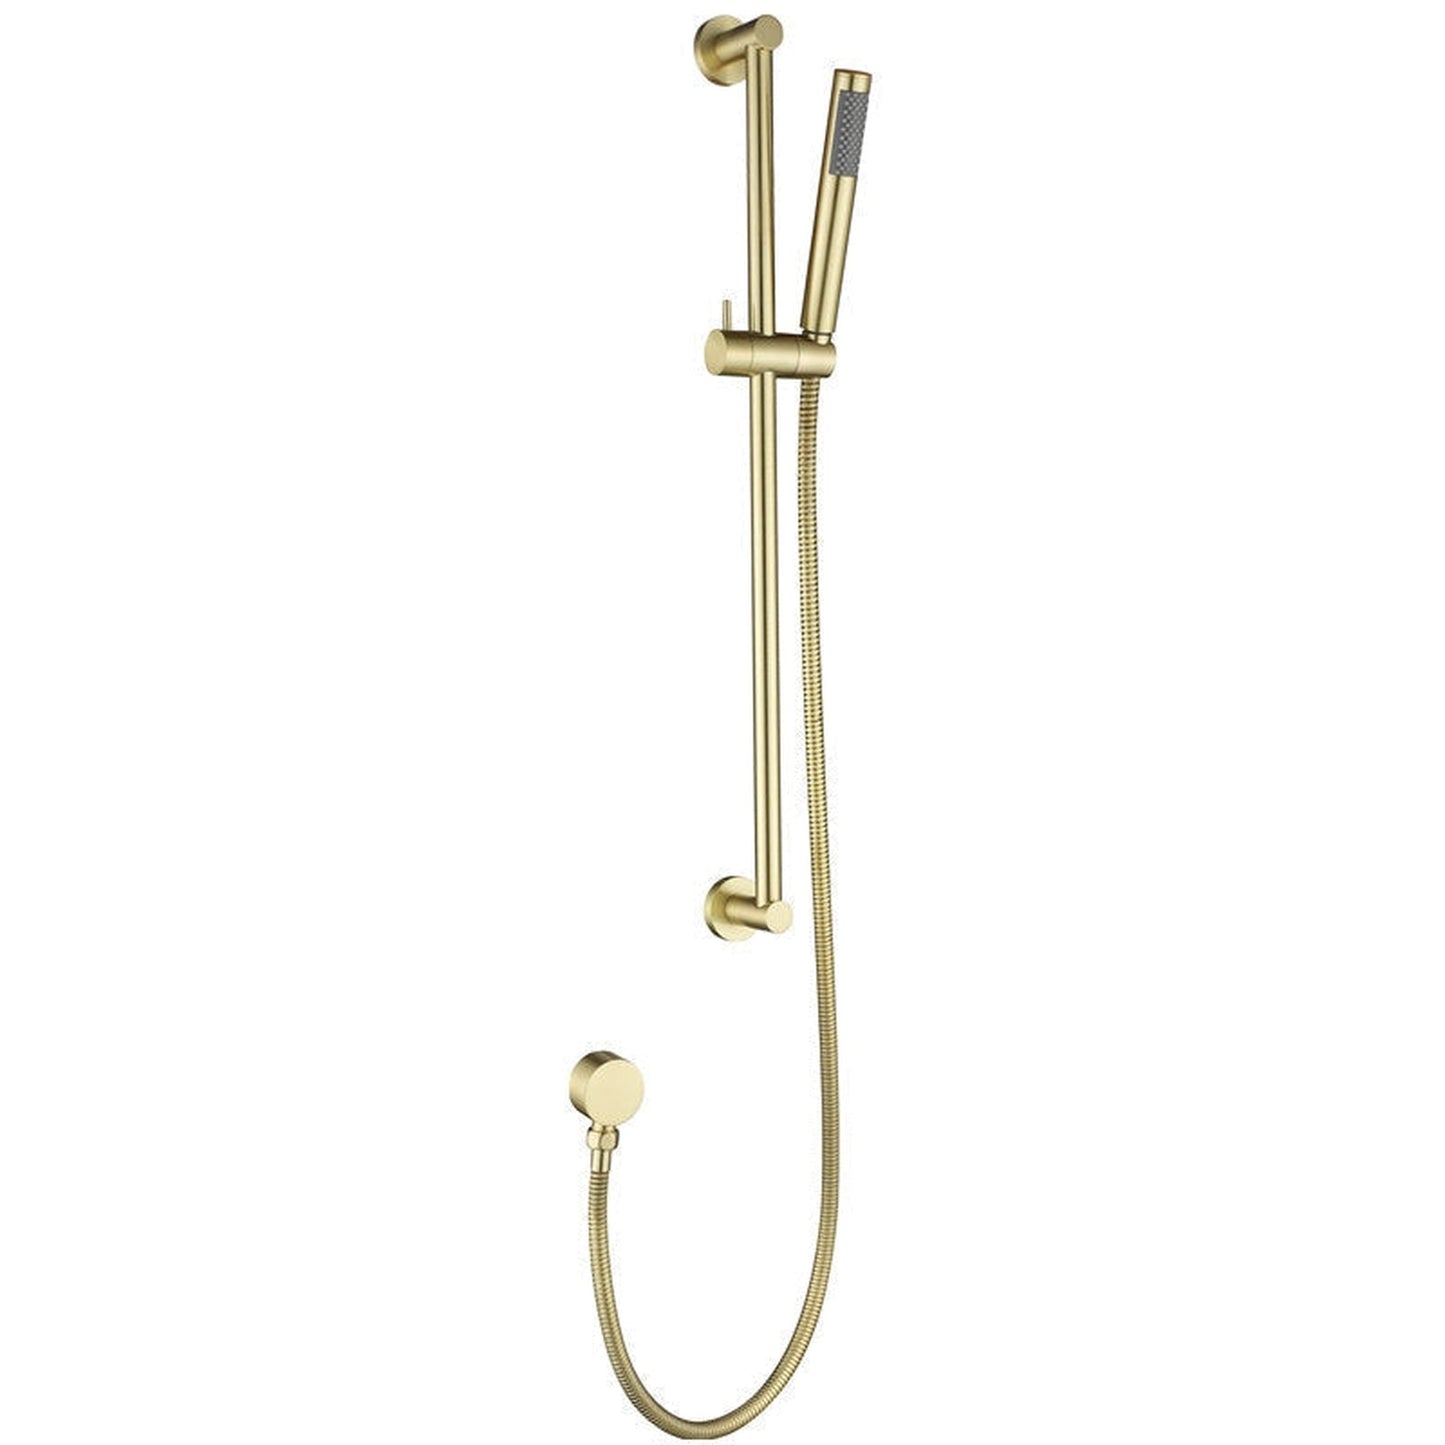 FontanaShowers Verona Creative Luxury 20" Brushed Gold Square Ceiling Mounted Thermostatic Button Mixer Rainfall Shower System With 6-Jet Body Sprays and Hand Shower